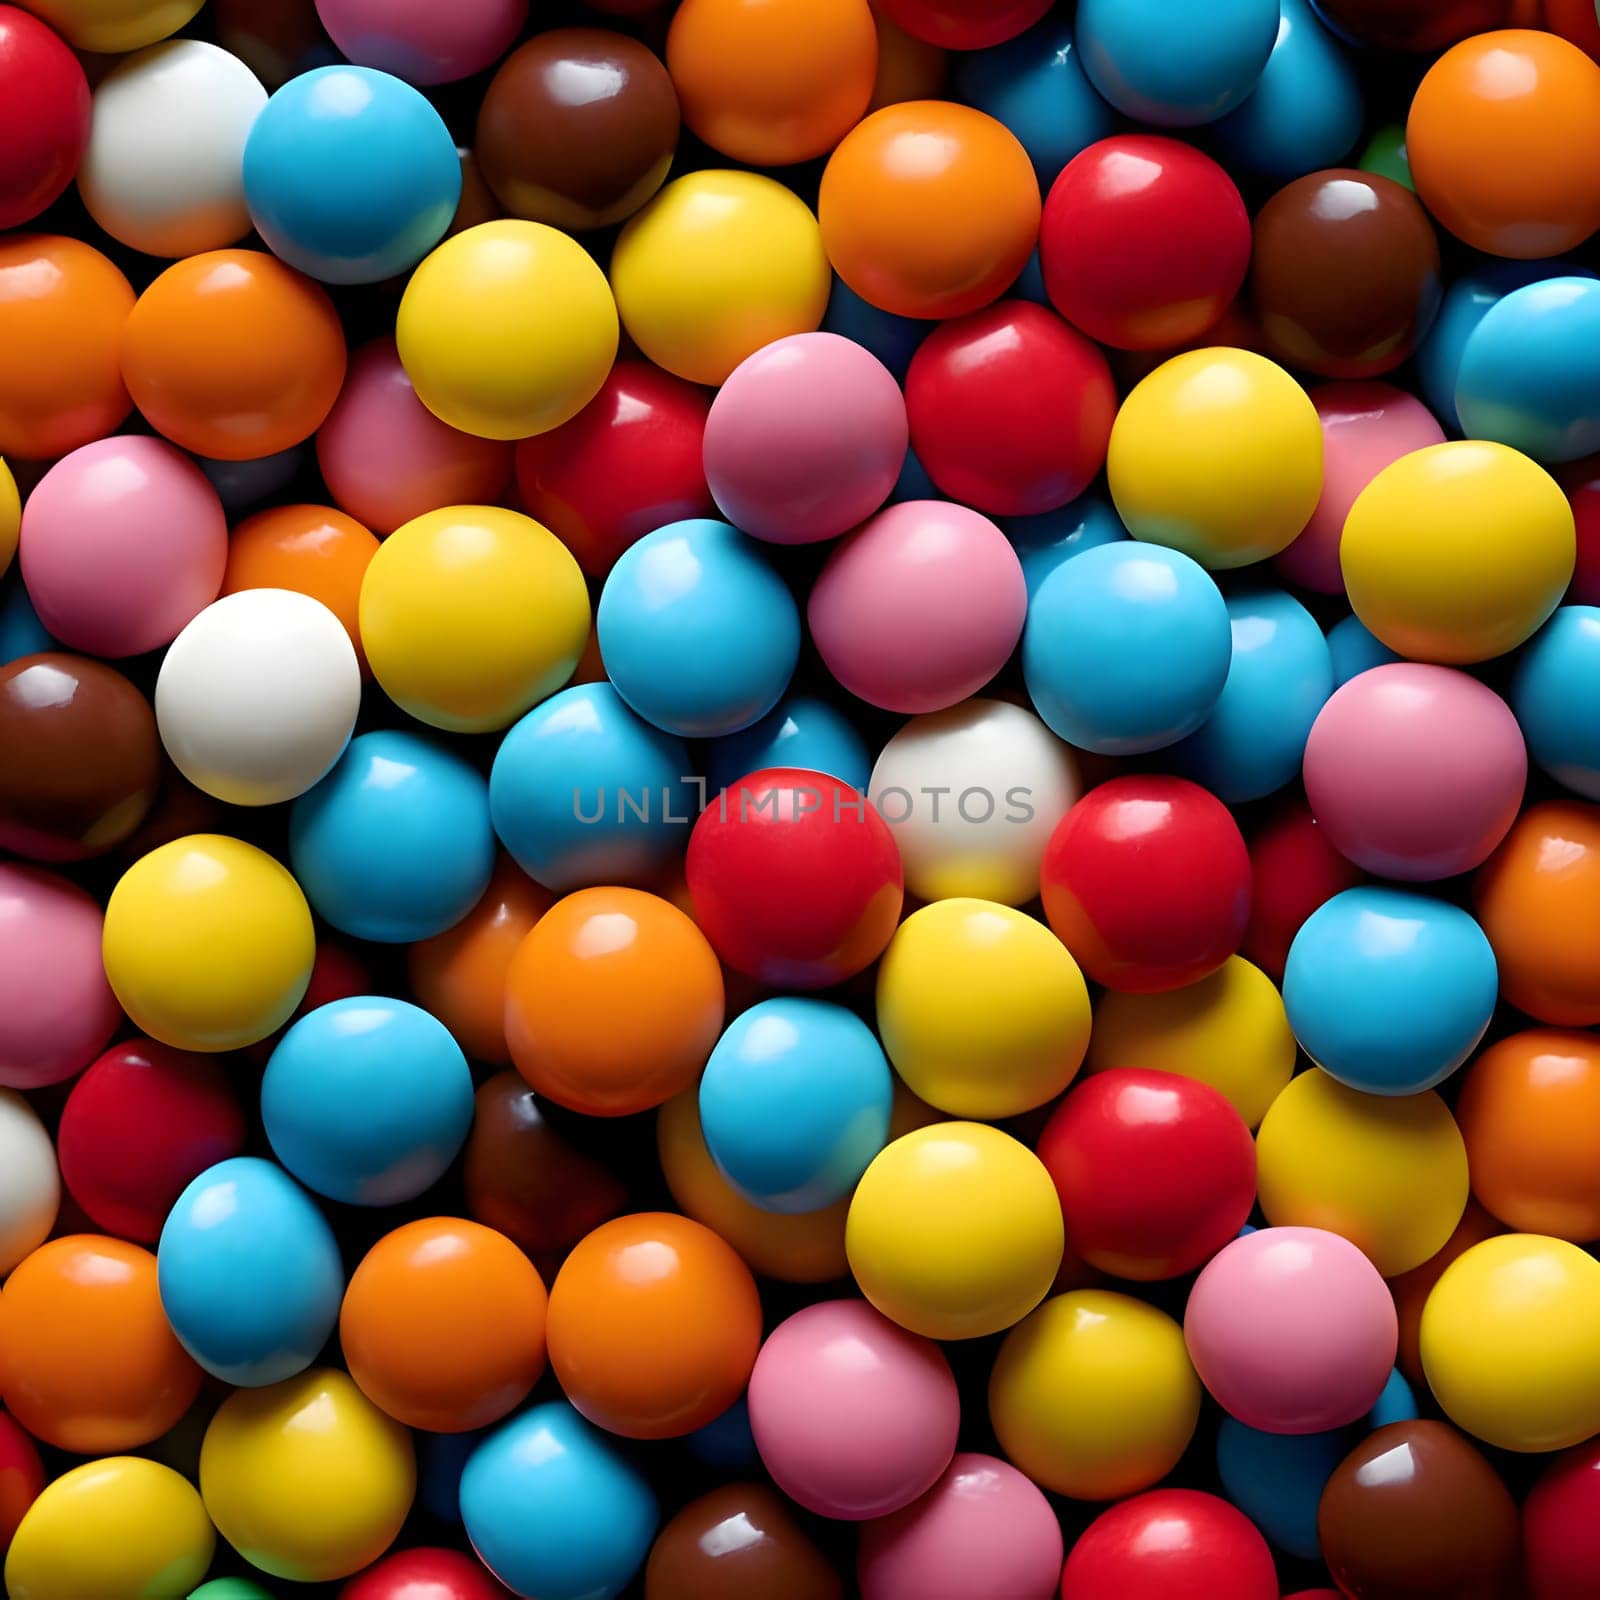 Patterns and banners backgrounds: Colorful gum balls background. Top view. 3D illustration.